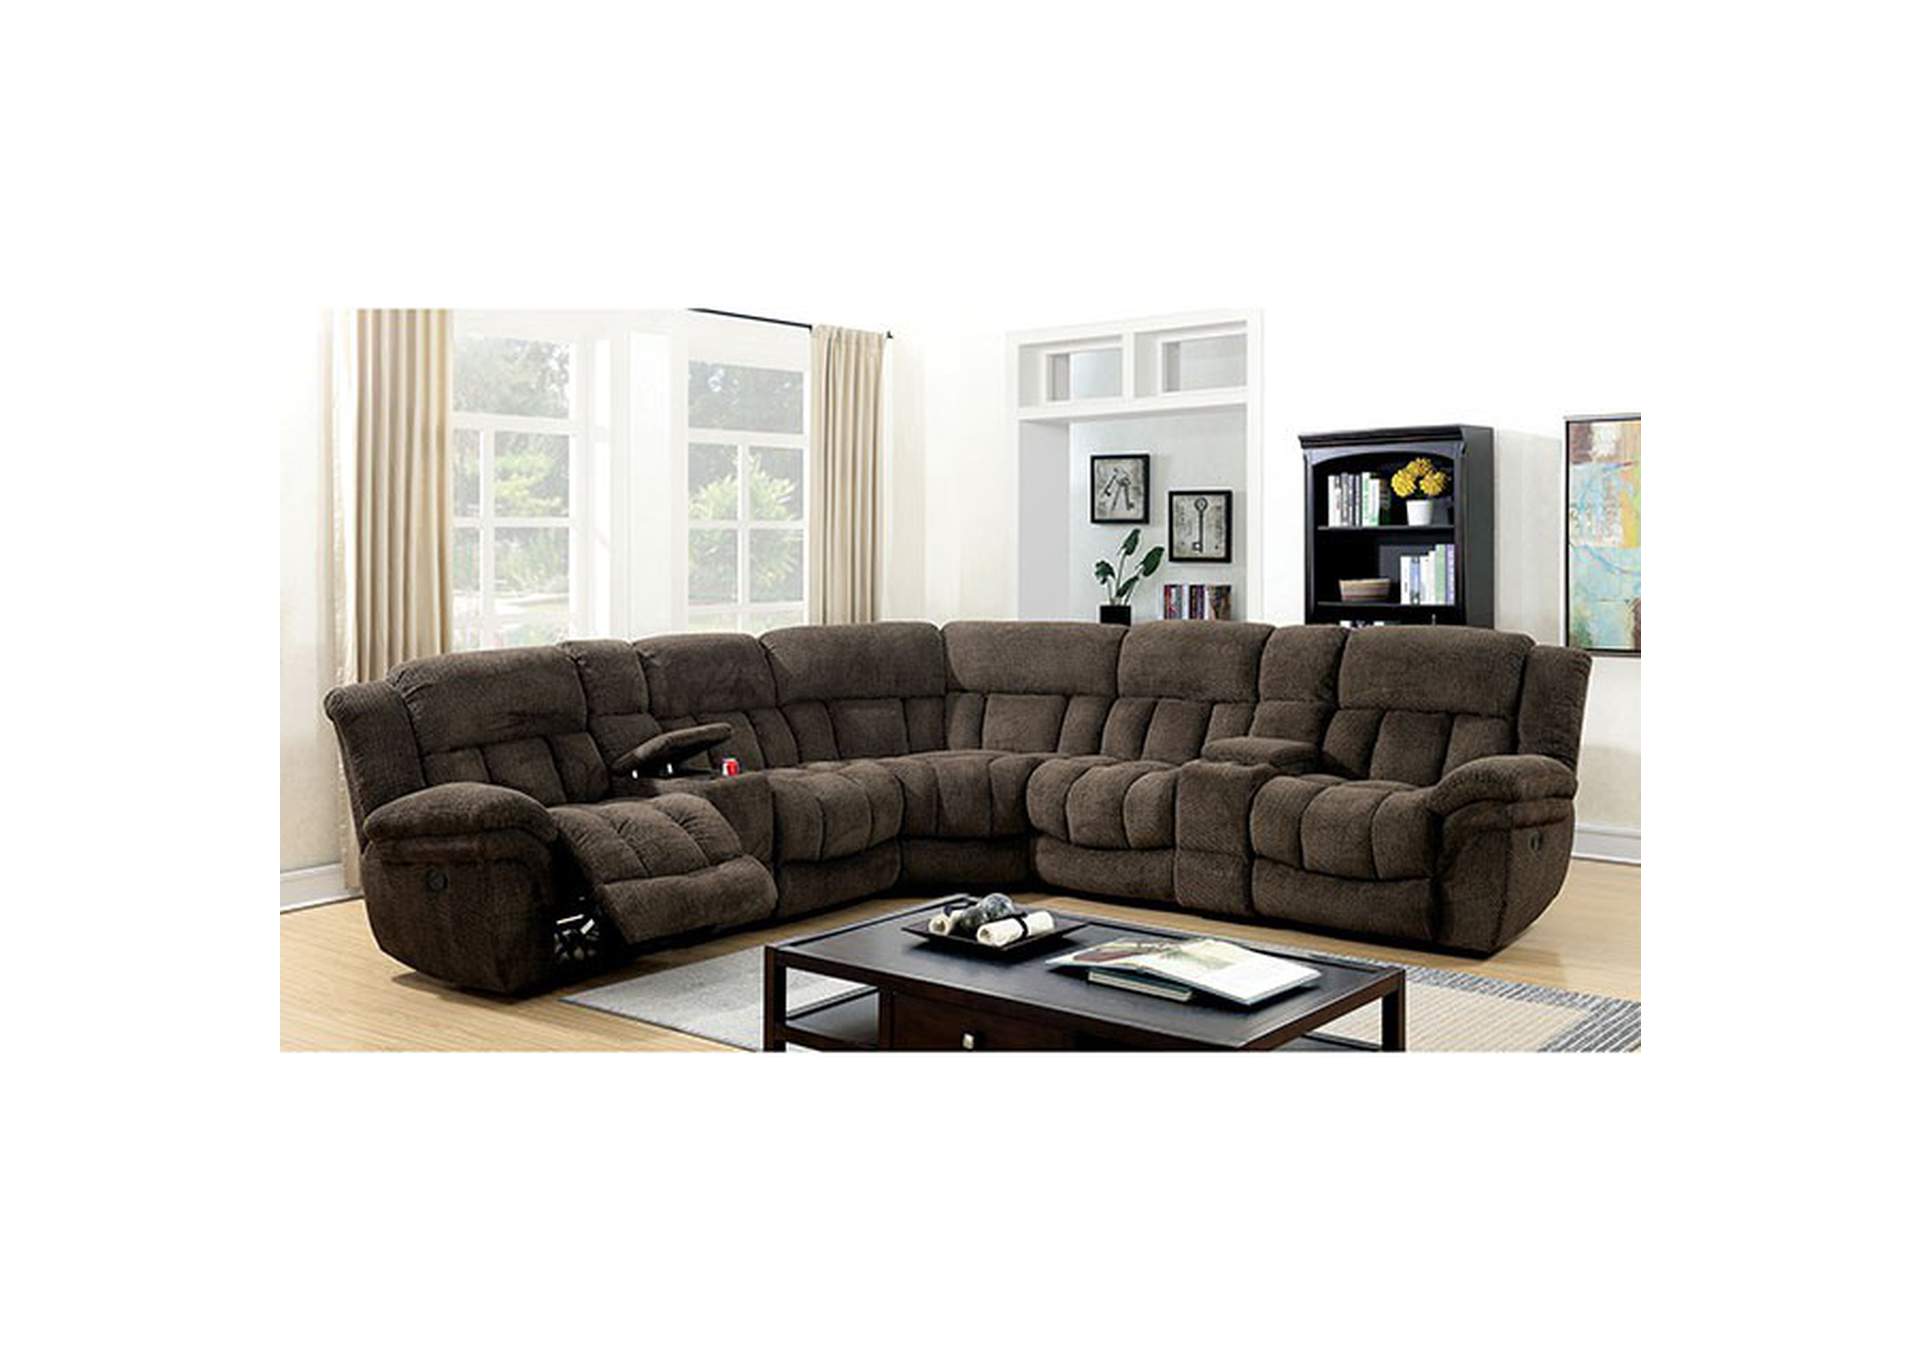 Irene Sectional,Furniture of America